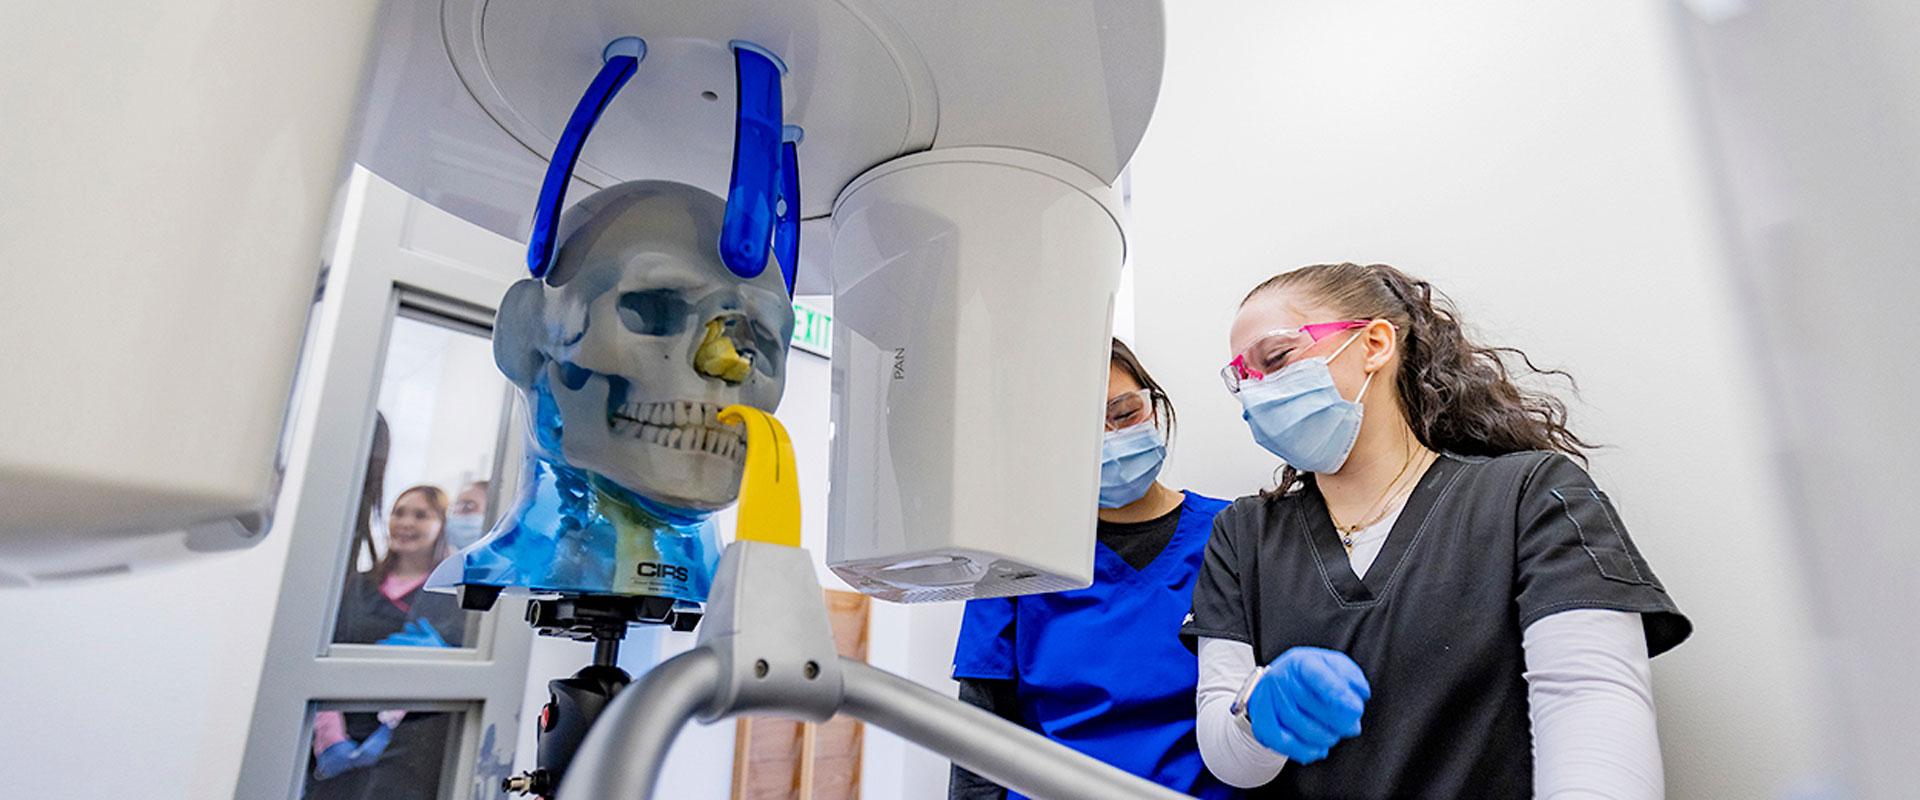 Students of the Dental Assistant program practice an oral x-ray on a mannequin in the dental lab of the UAF Community and Technical College